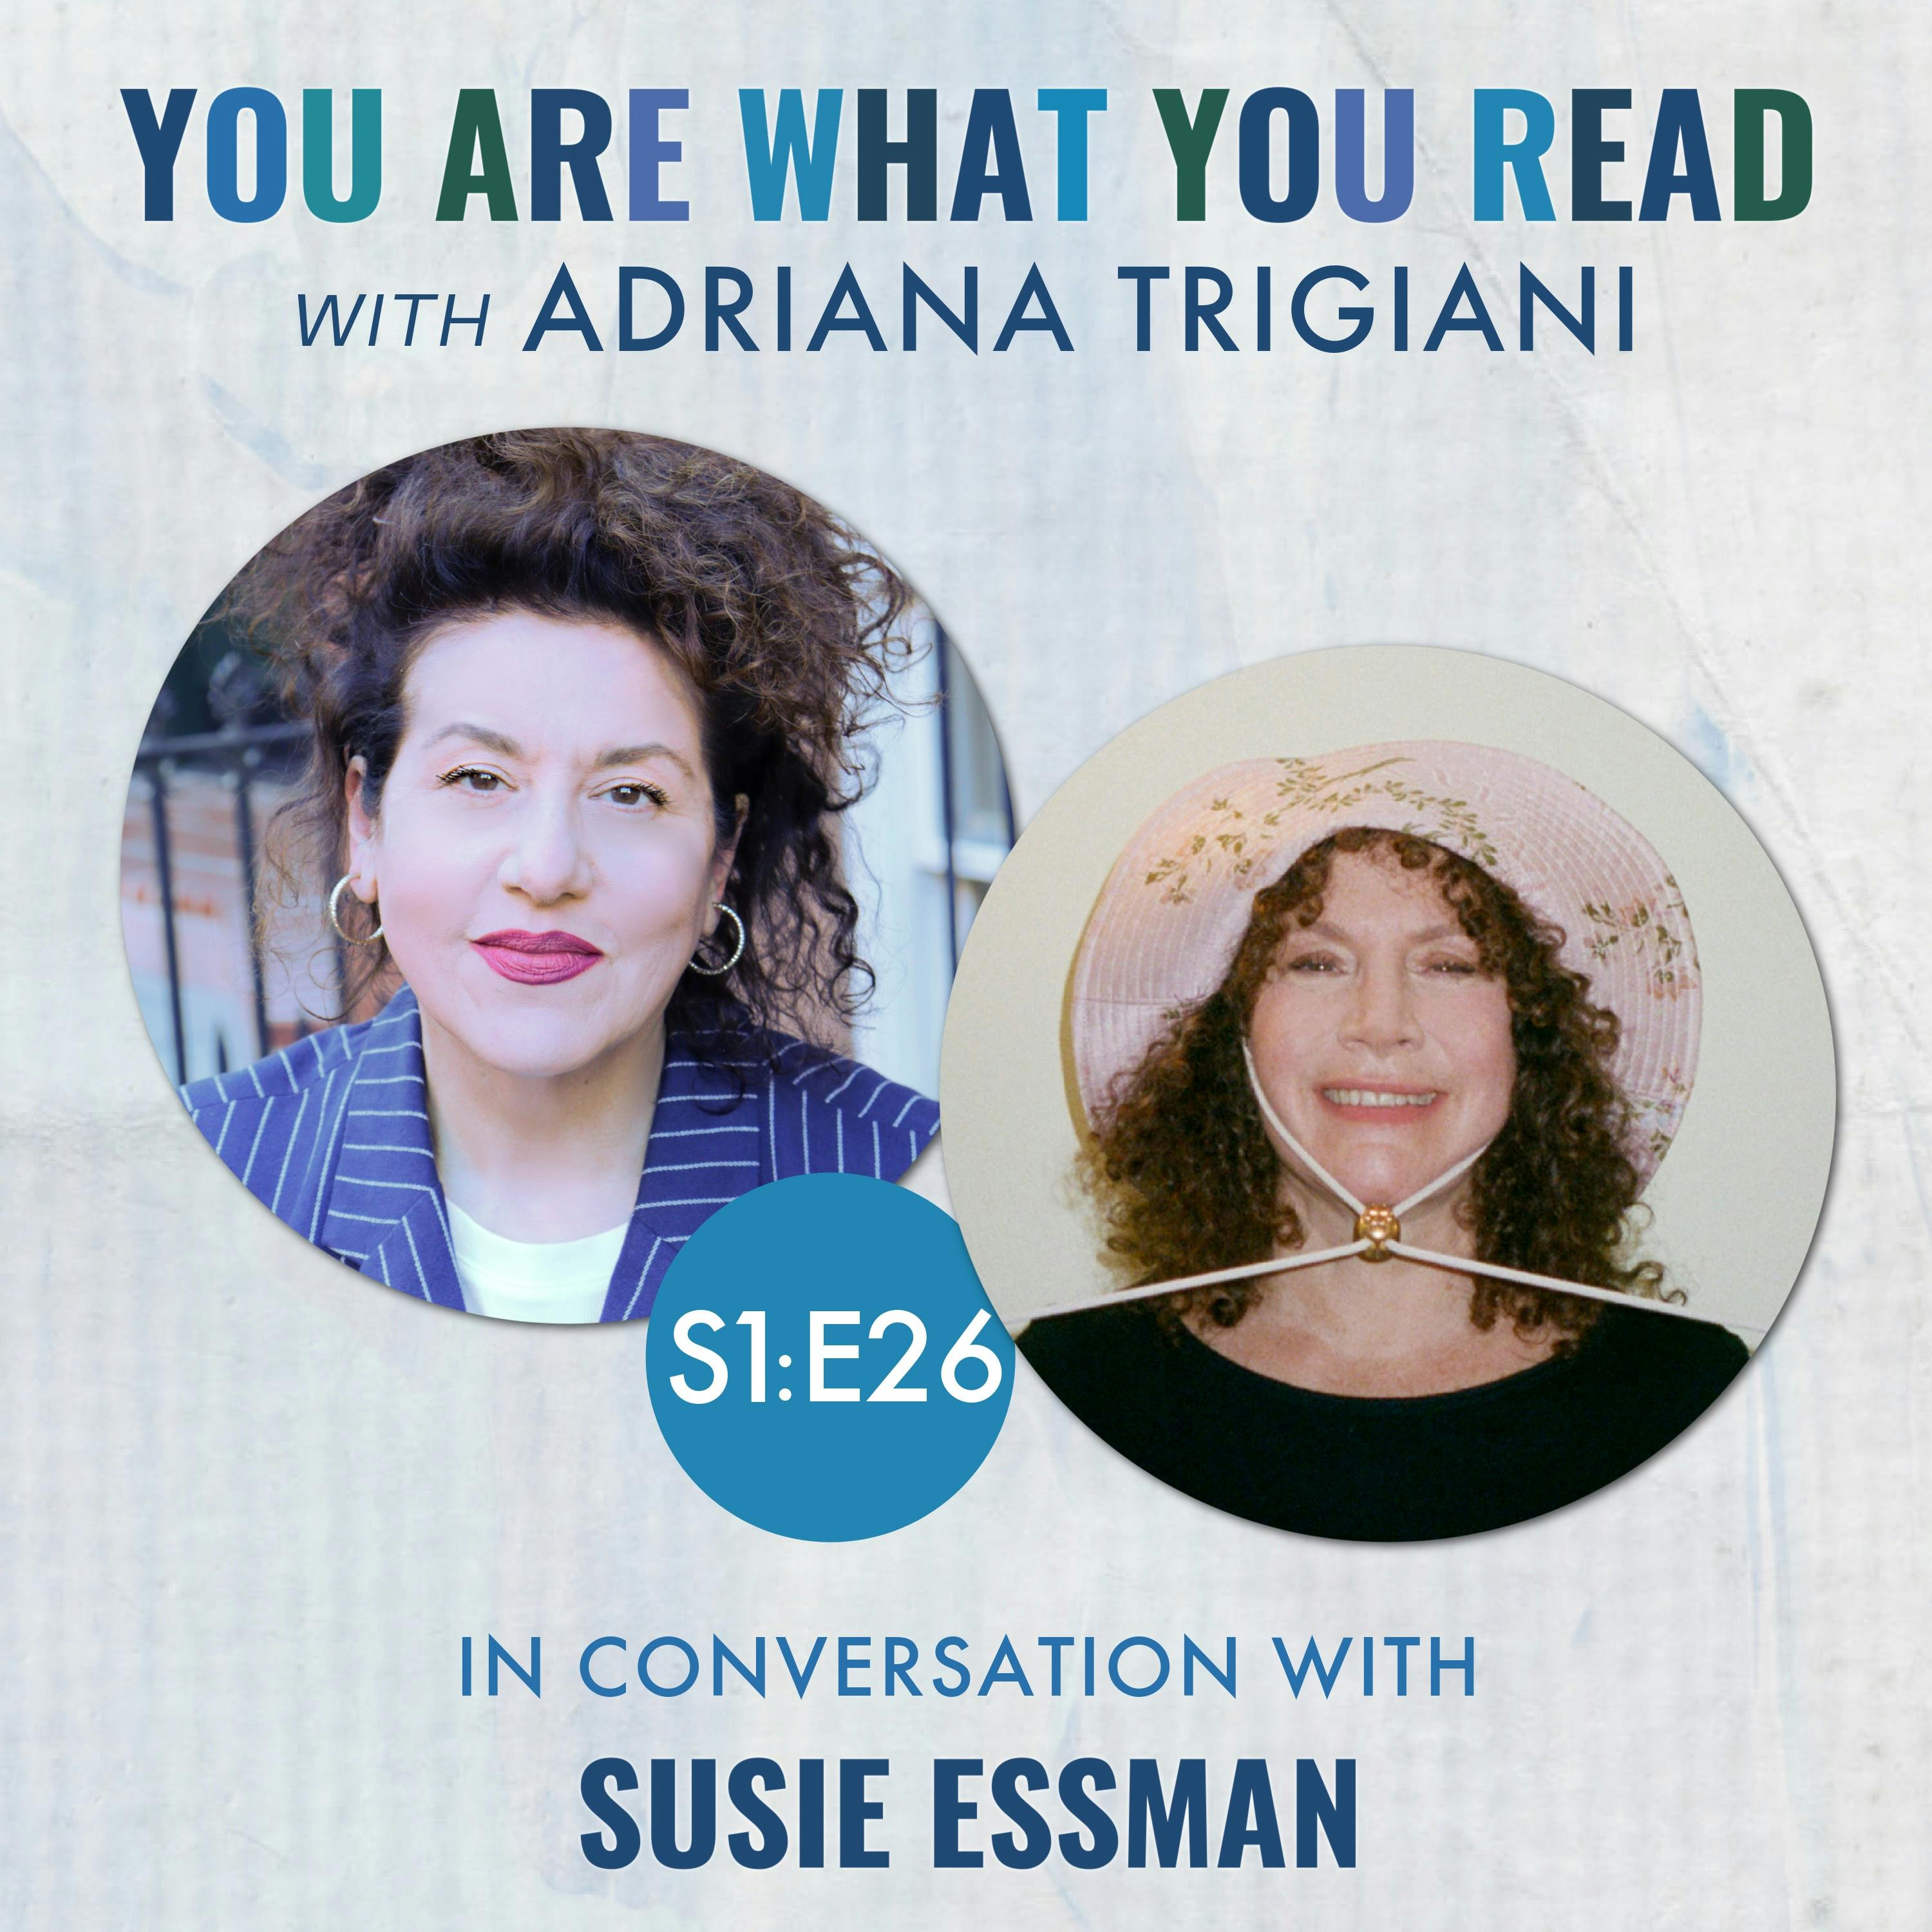 Susie Essman on books, friendships and the final season of 'Curb Your Enthusiasm'